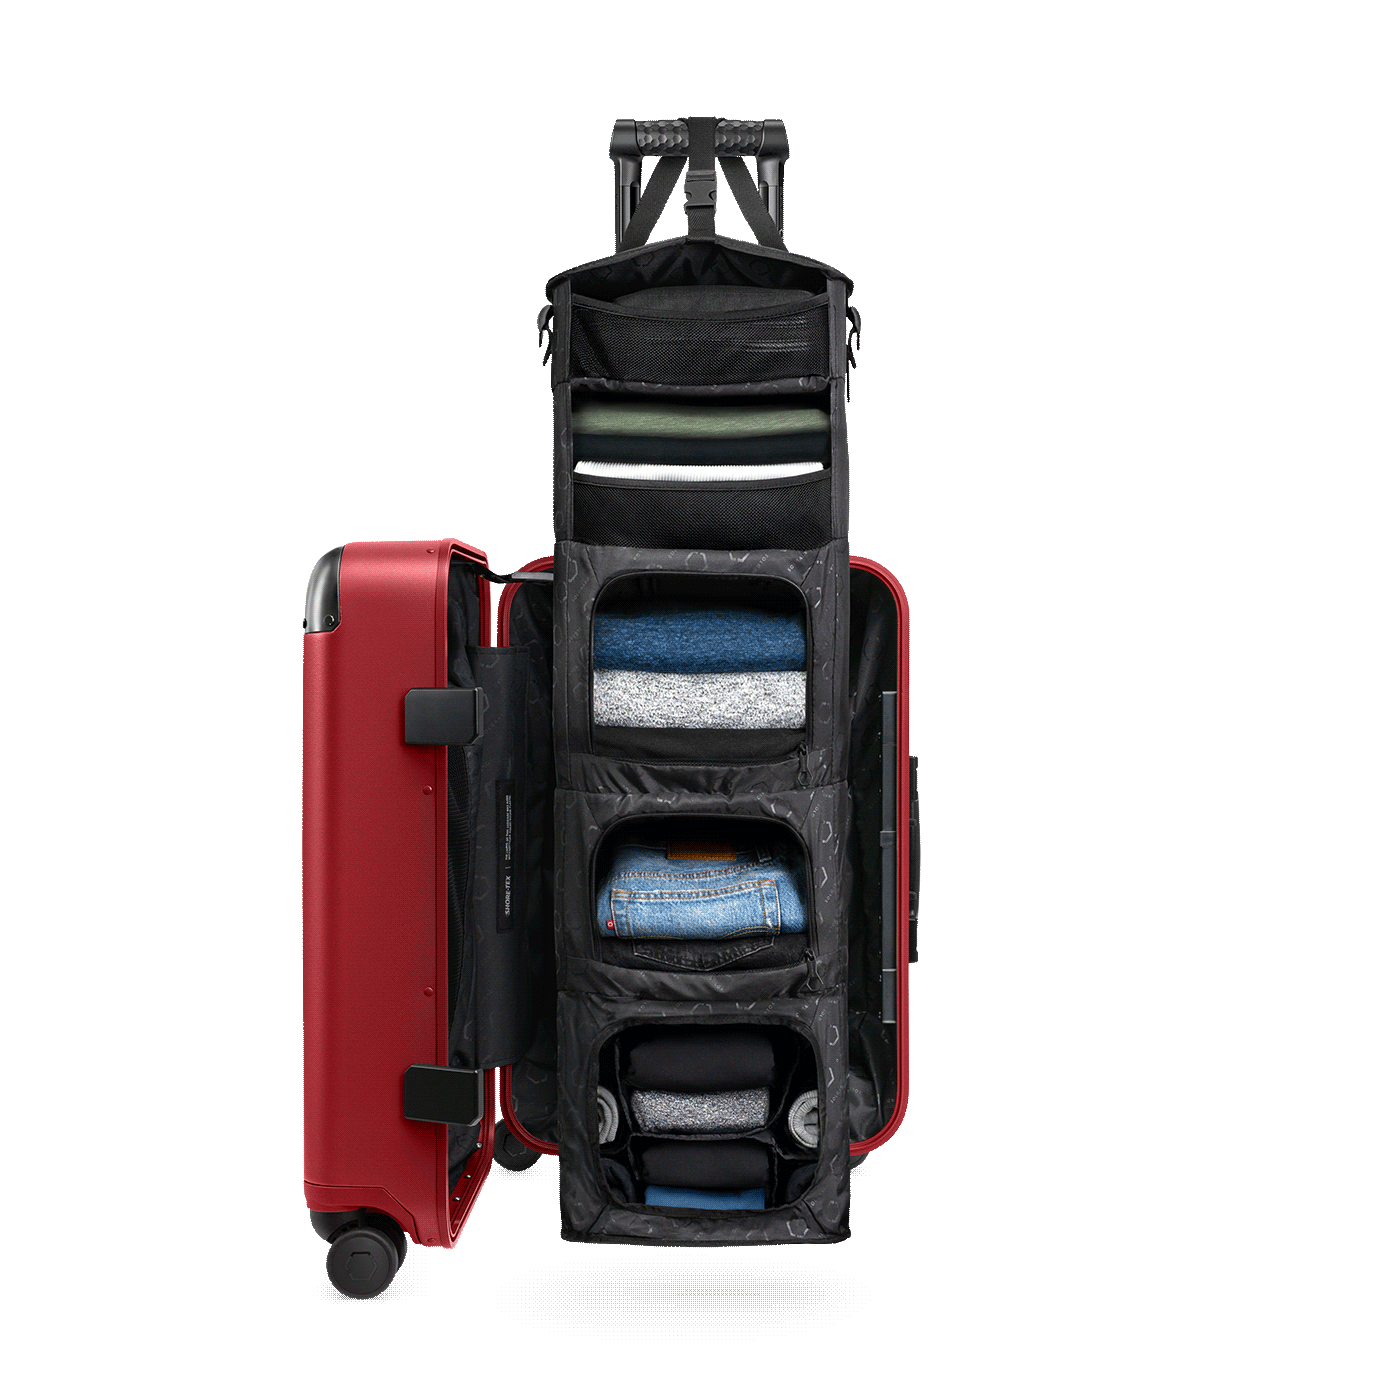 Venetian Red | Carry-On Closet